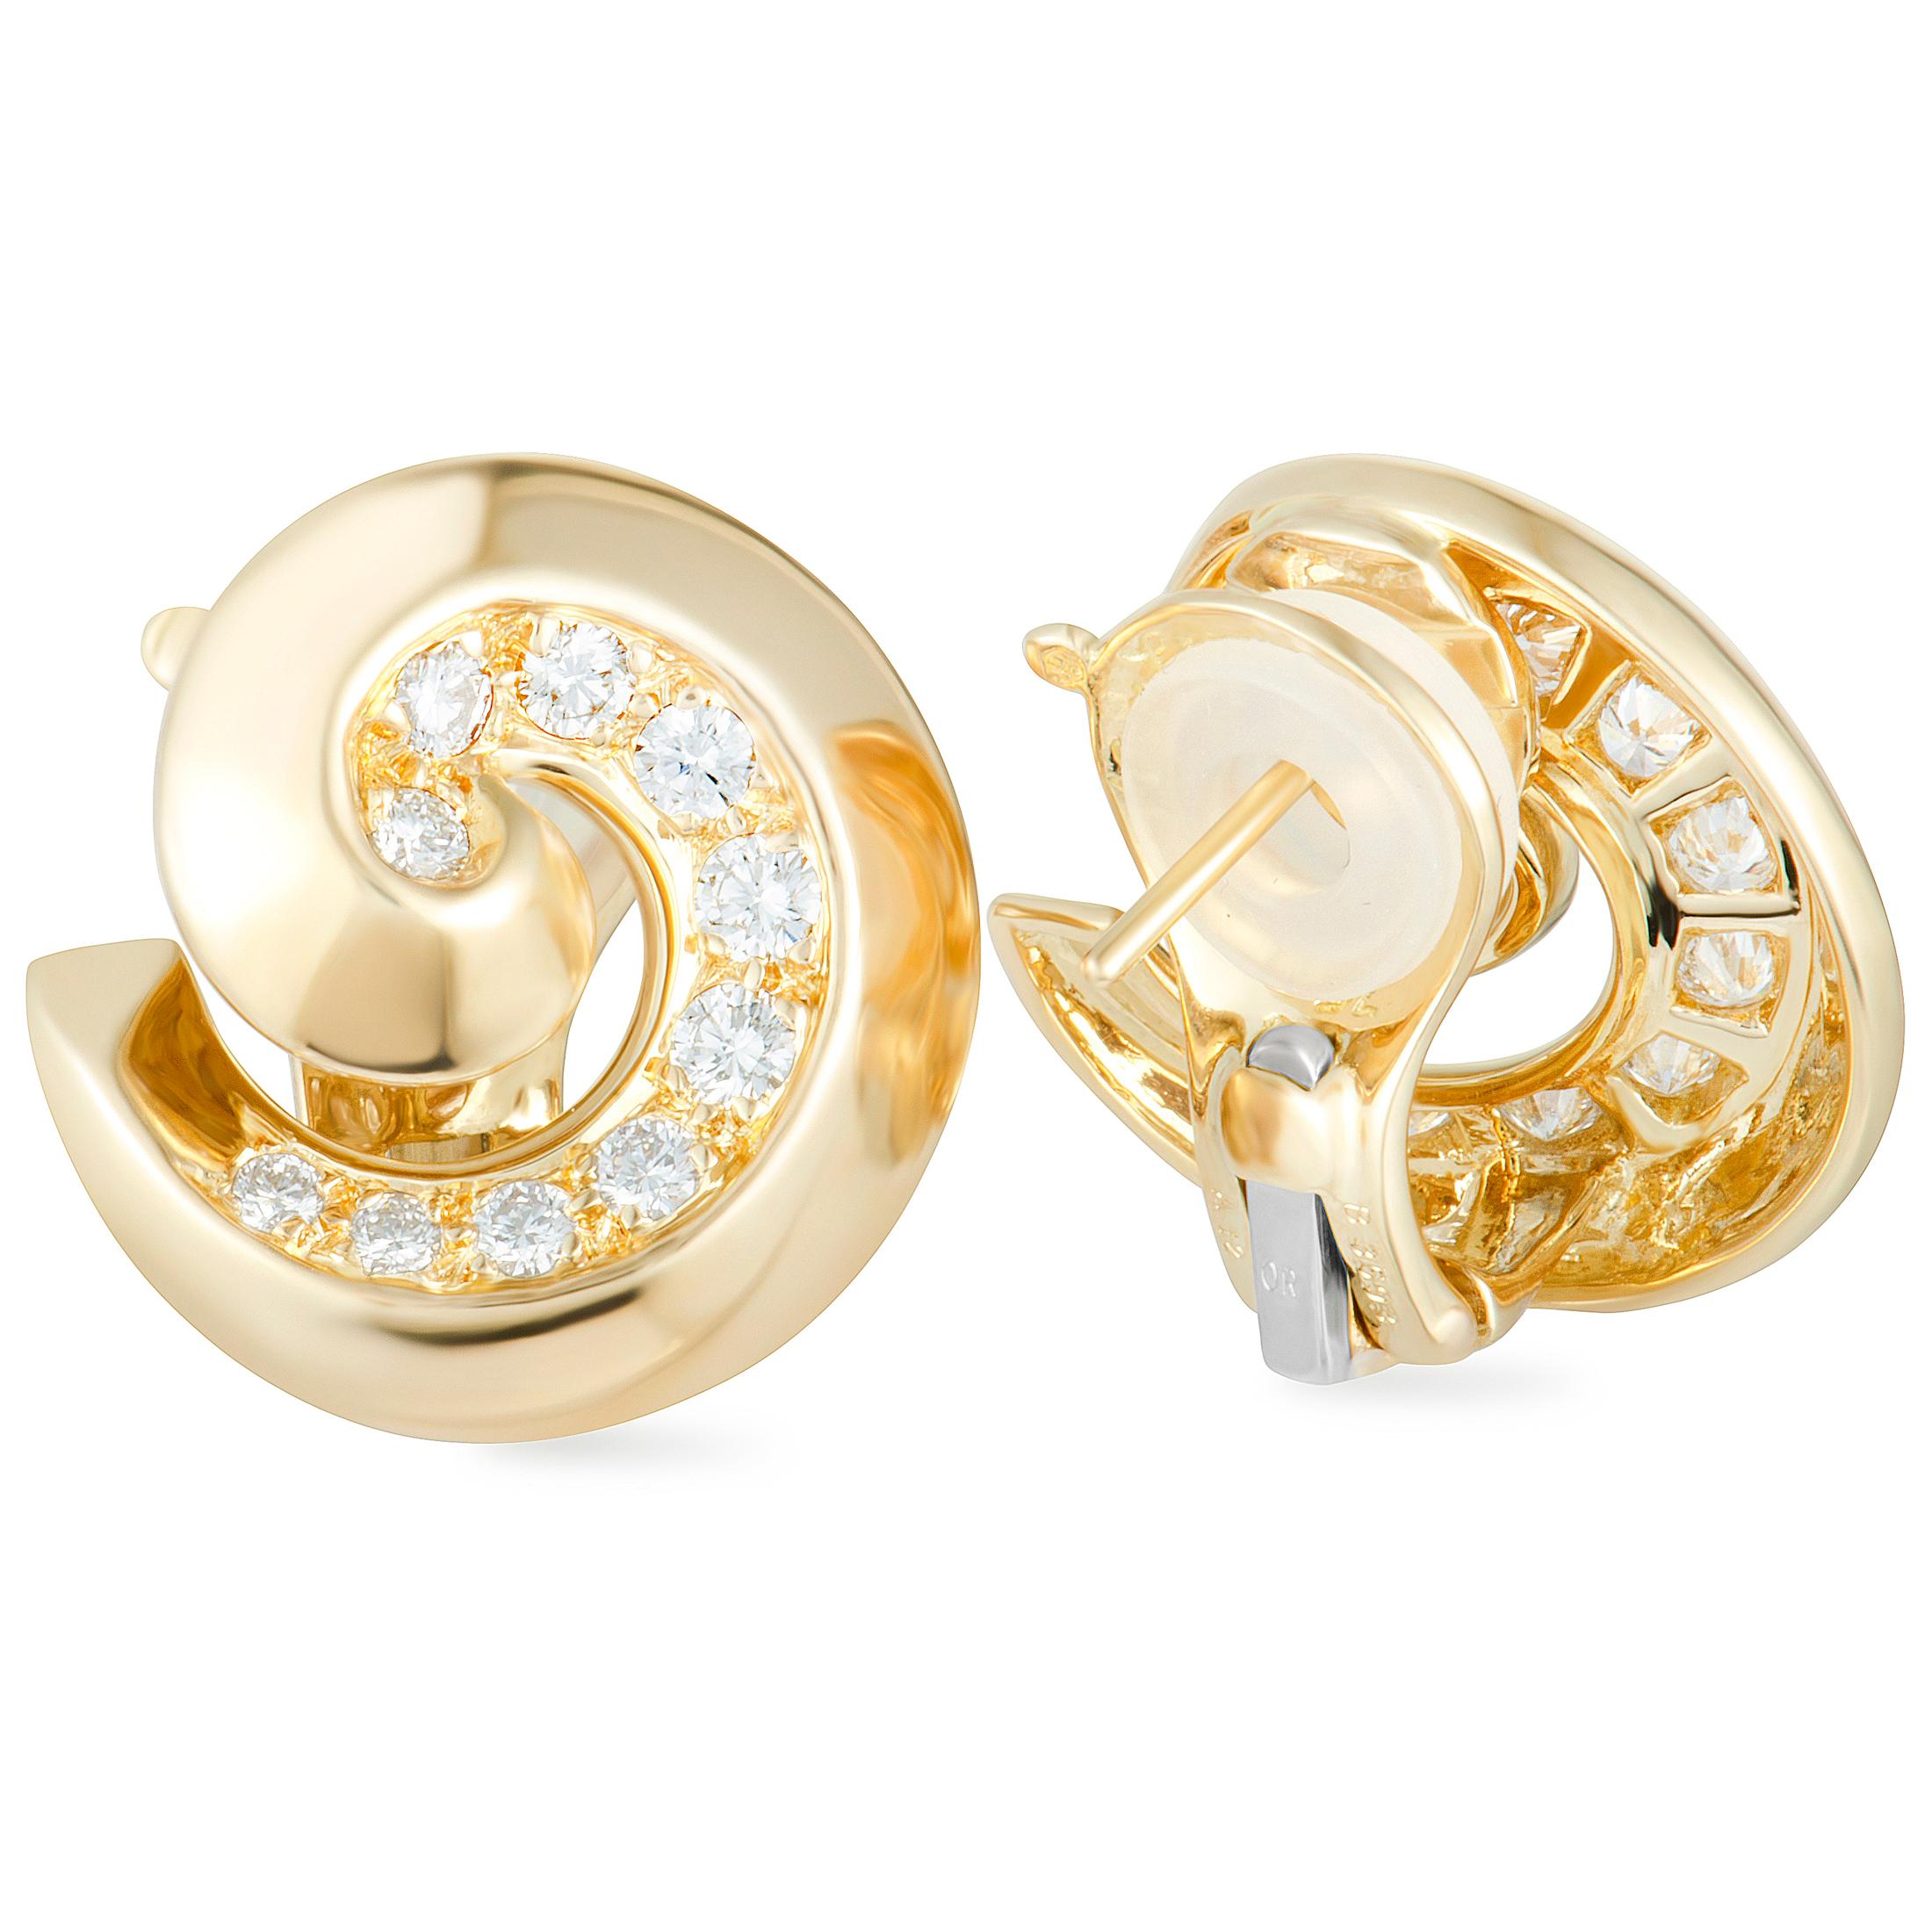 An exceptionally elegant design is beautifully presented in alluring 18K yellow gold in these wonderful earrings that offer a splendidly refined appearance. The earrings are created by Van Cleef & Arpels and the pair is luxuriously decorated with